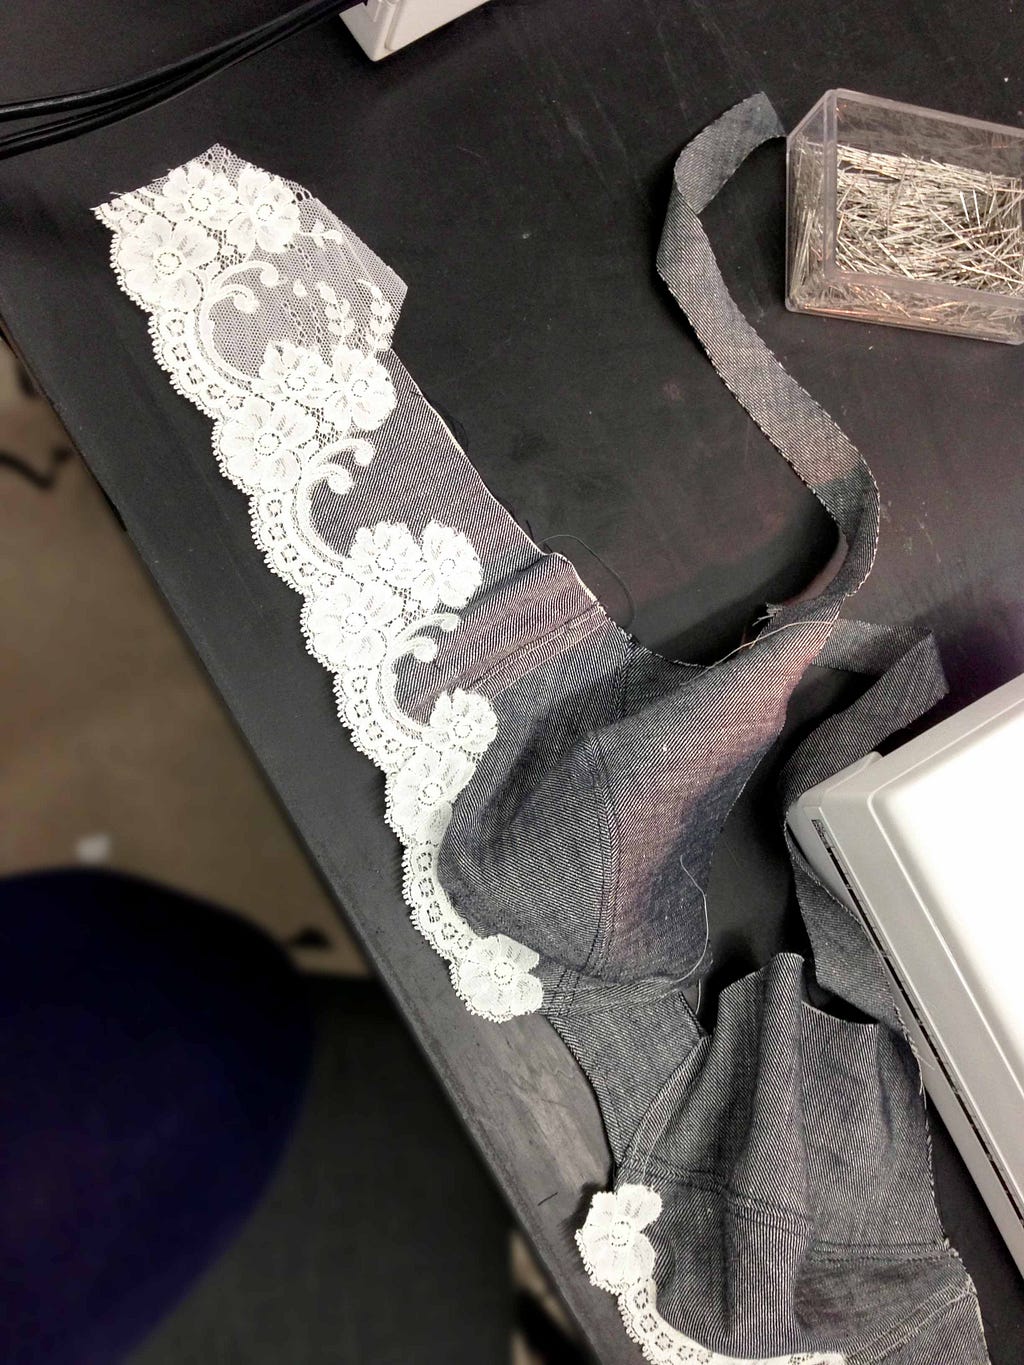 Birdseye view of a denim bra with lace being constructed